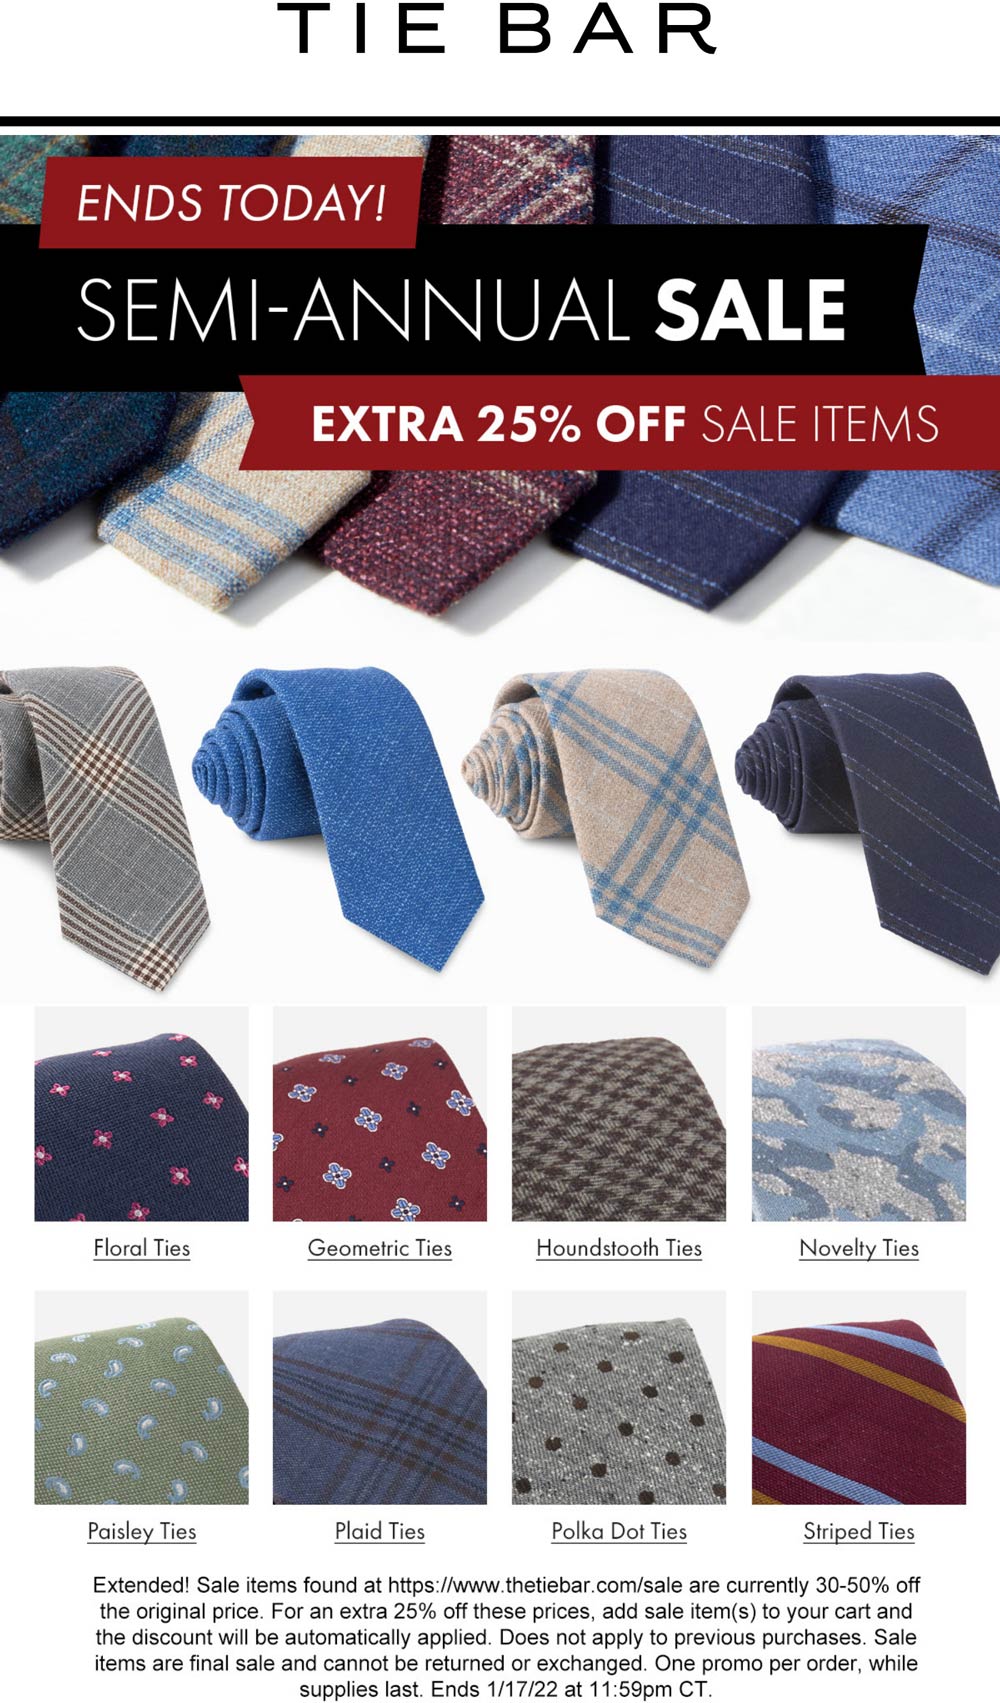 Tie Bar restaurants Coupon  Extra 25% off sale items today at Tie Bar #tiebar 